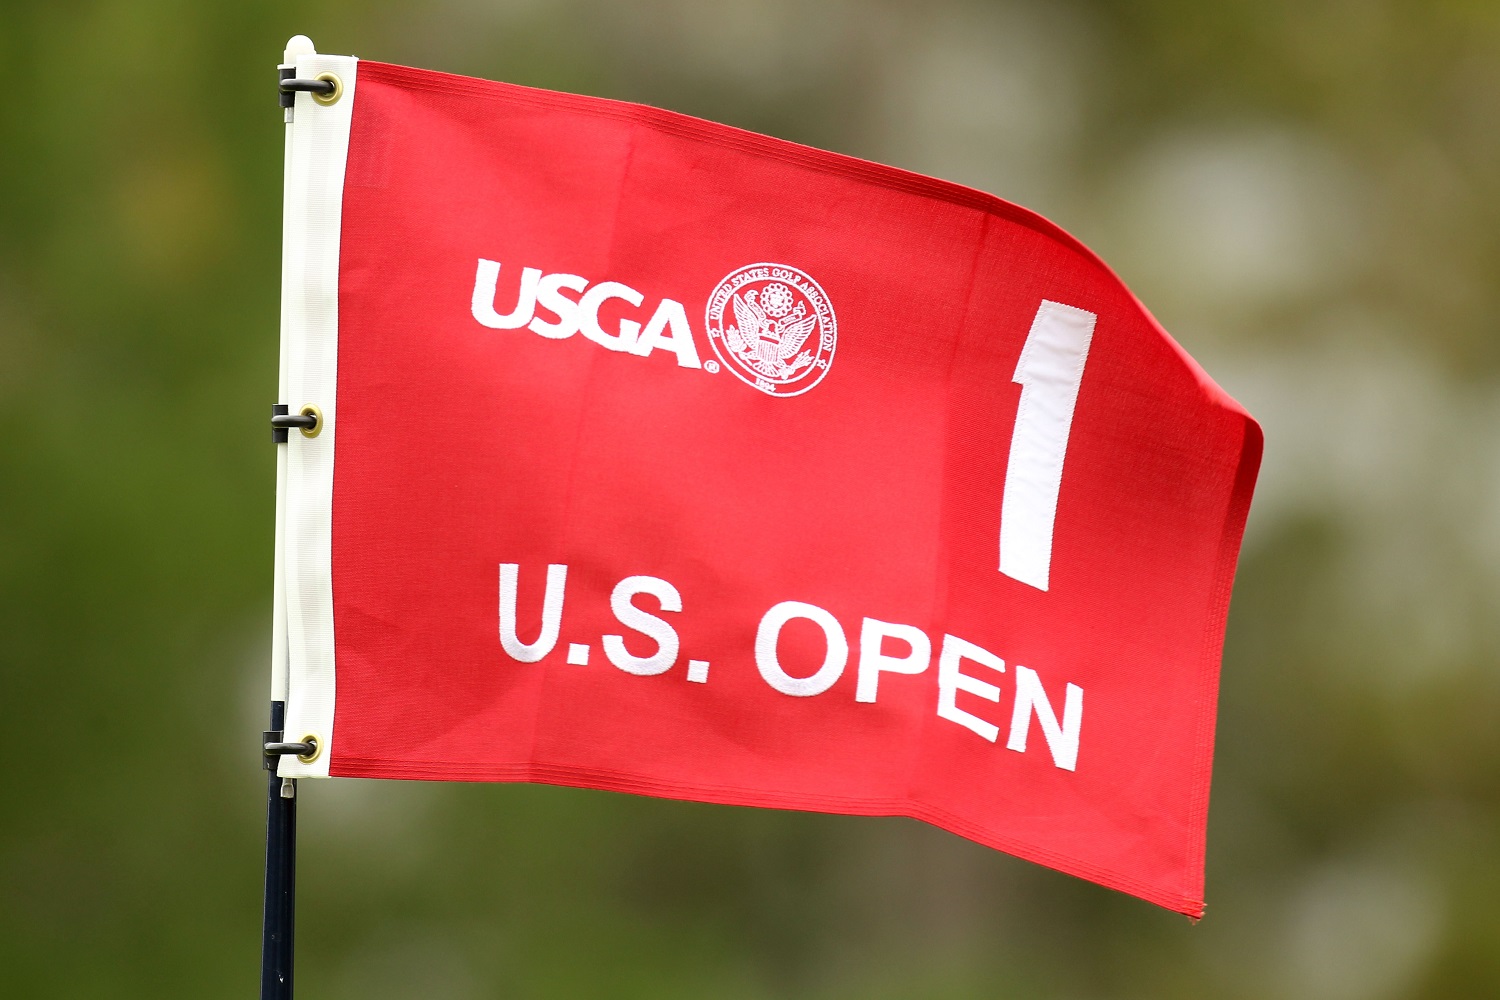 What Is the Lowest 72-Hole Score in U.S. Open History and Who Shot It?